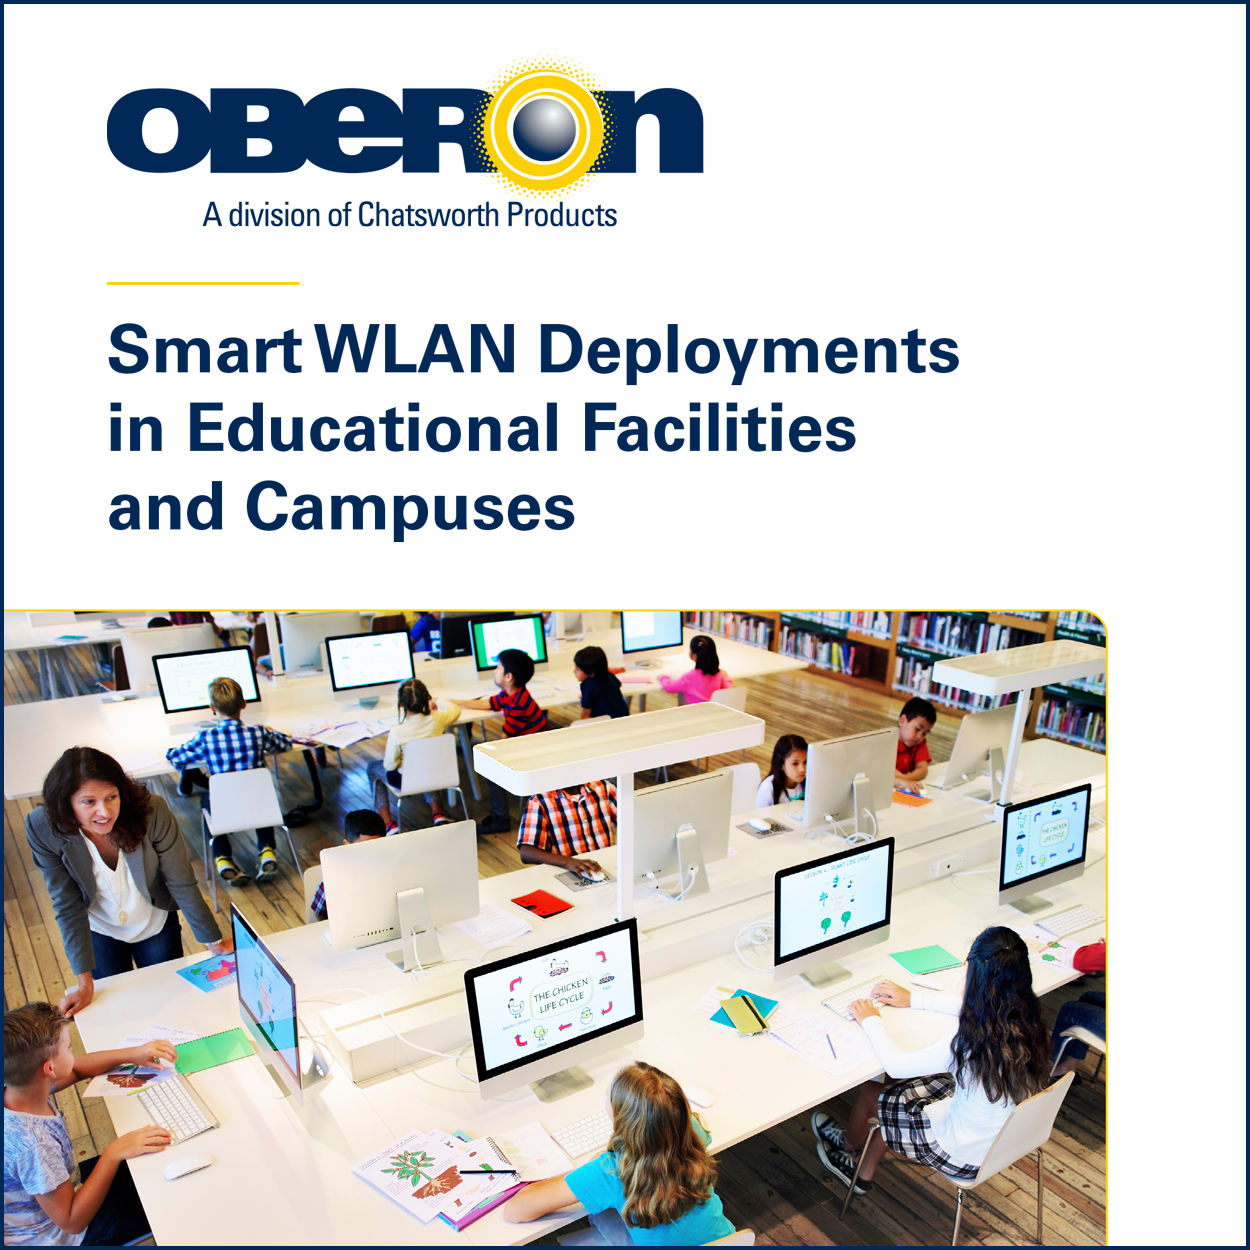 Smart WLAN Deployments in Educational Facilities and Campuses Image